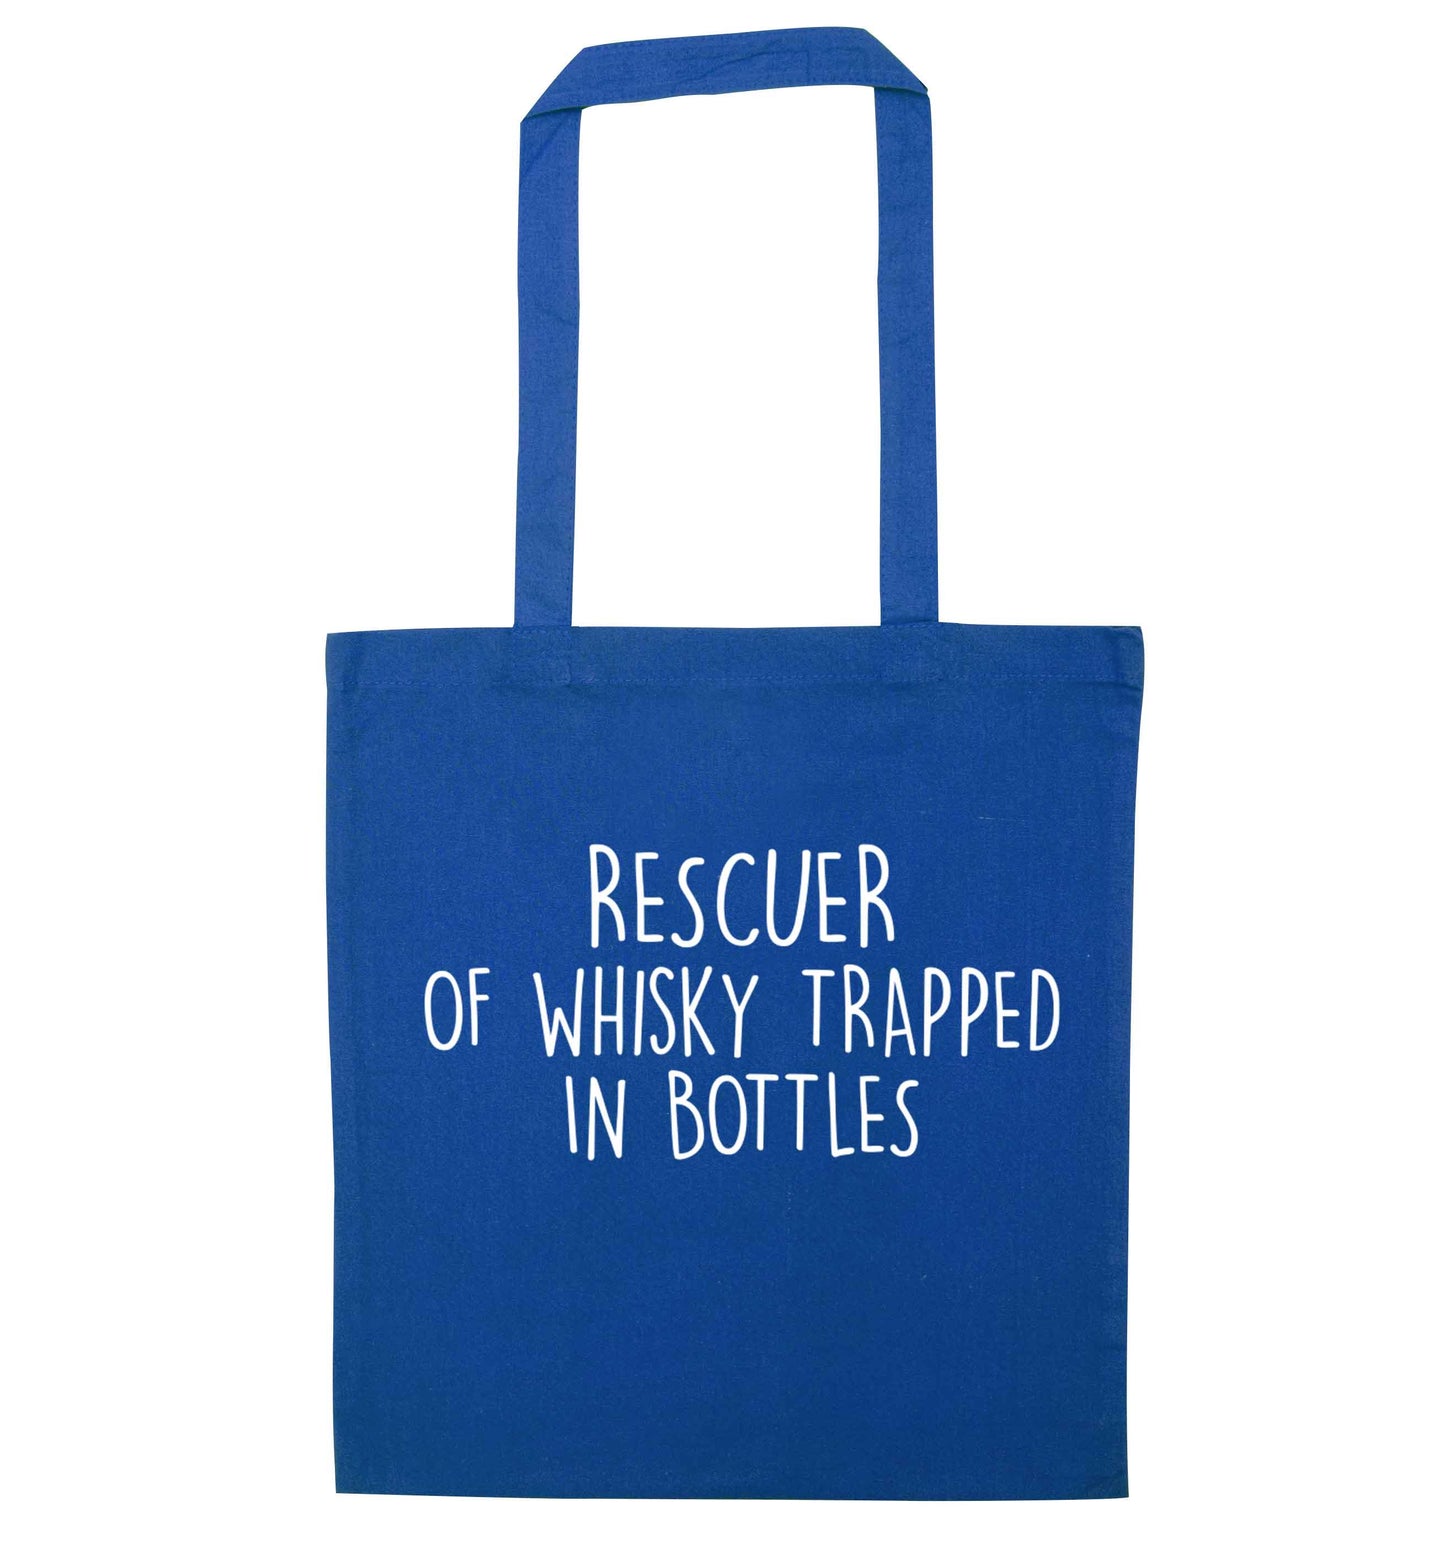 Rescuer of whisky trapped in bottles blue tote bag